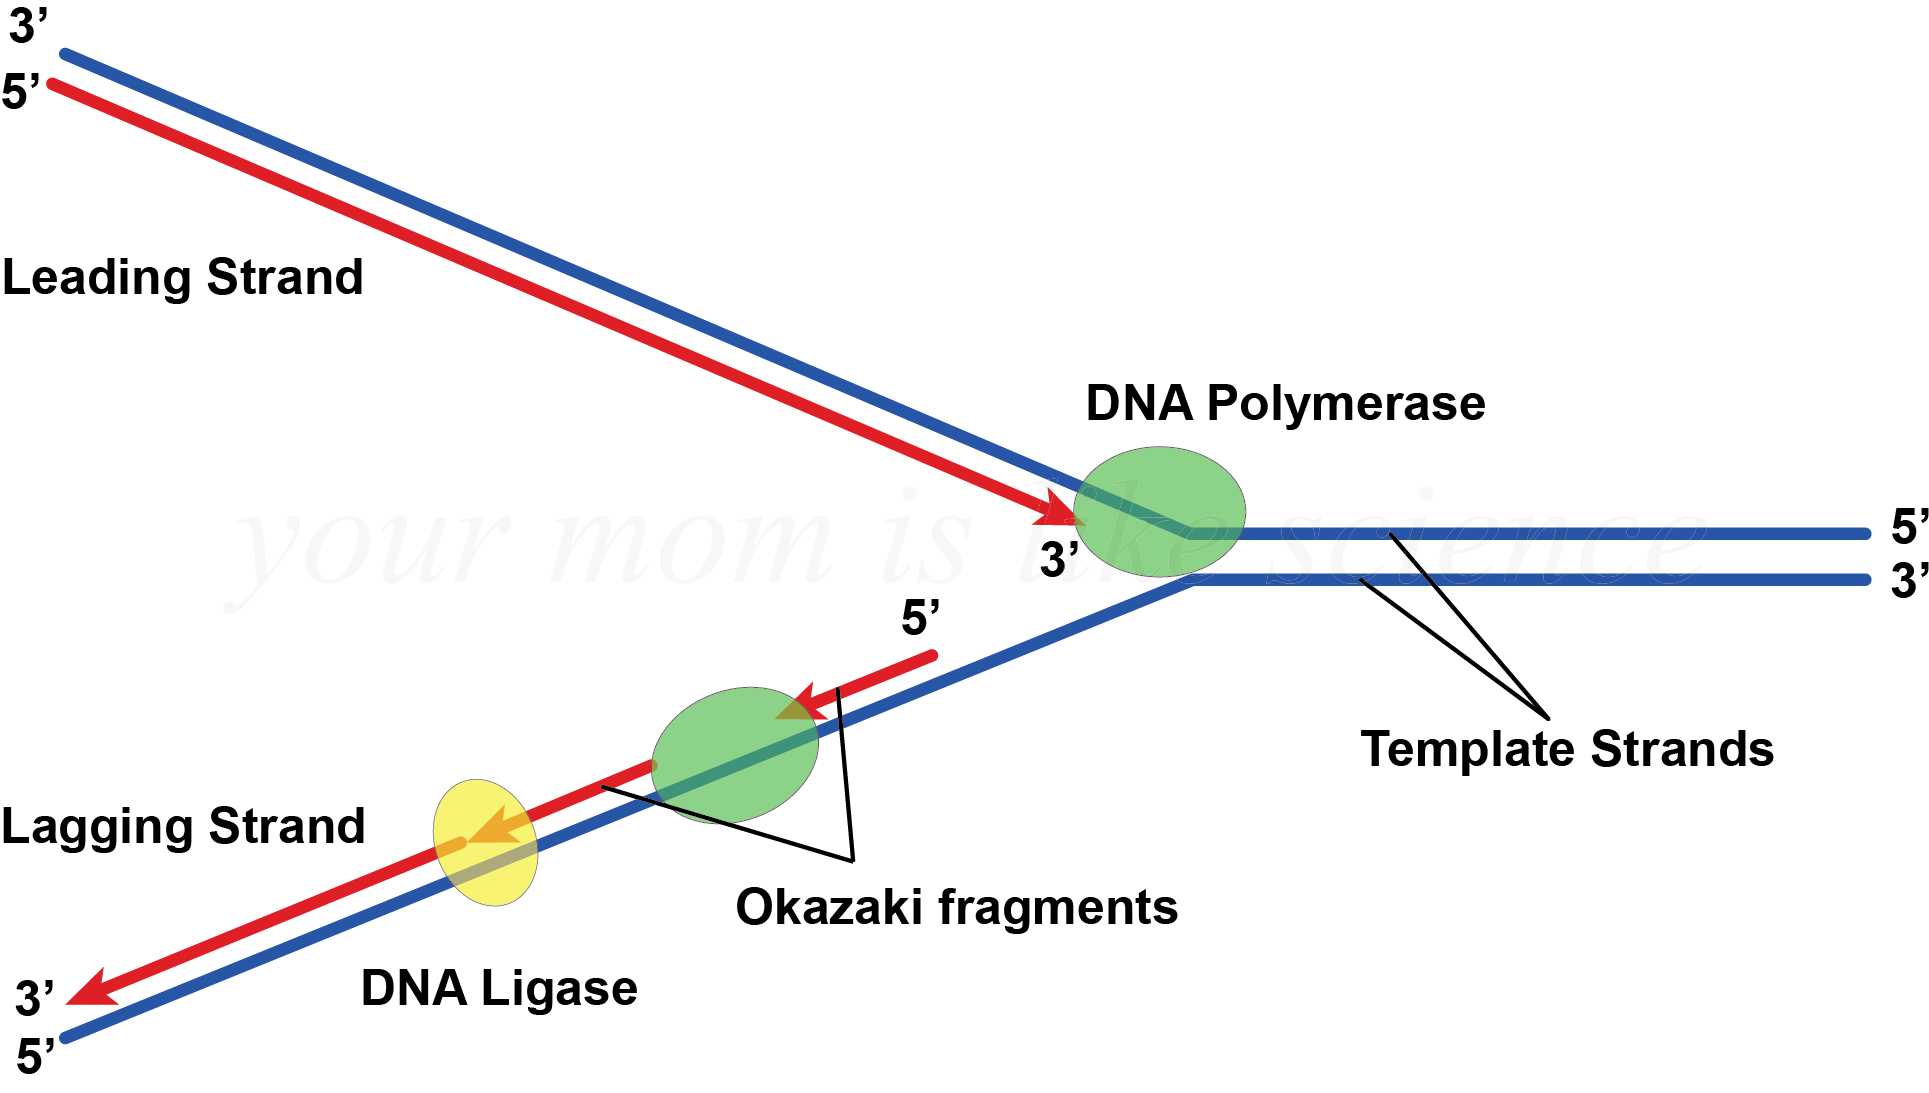 does-the-leading-strand-require-dna-ligase-socratic